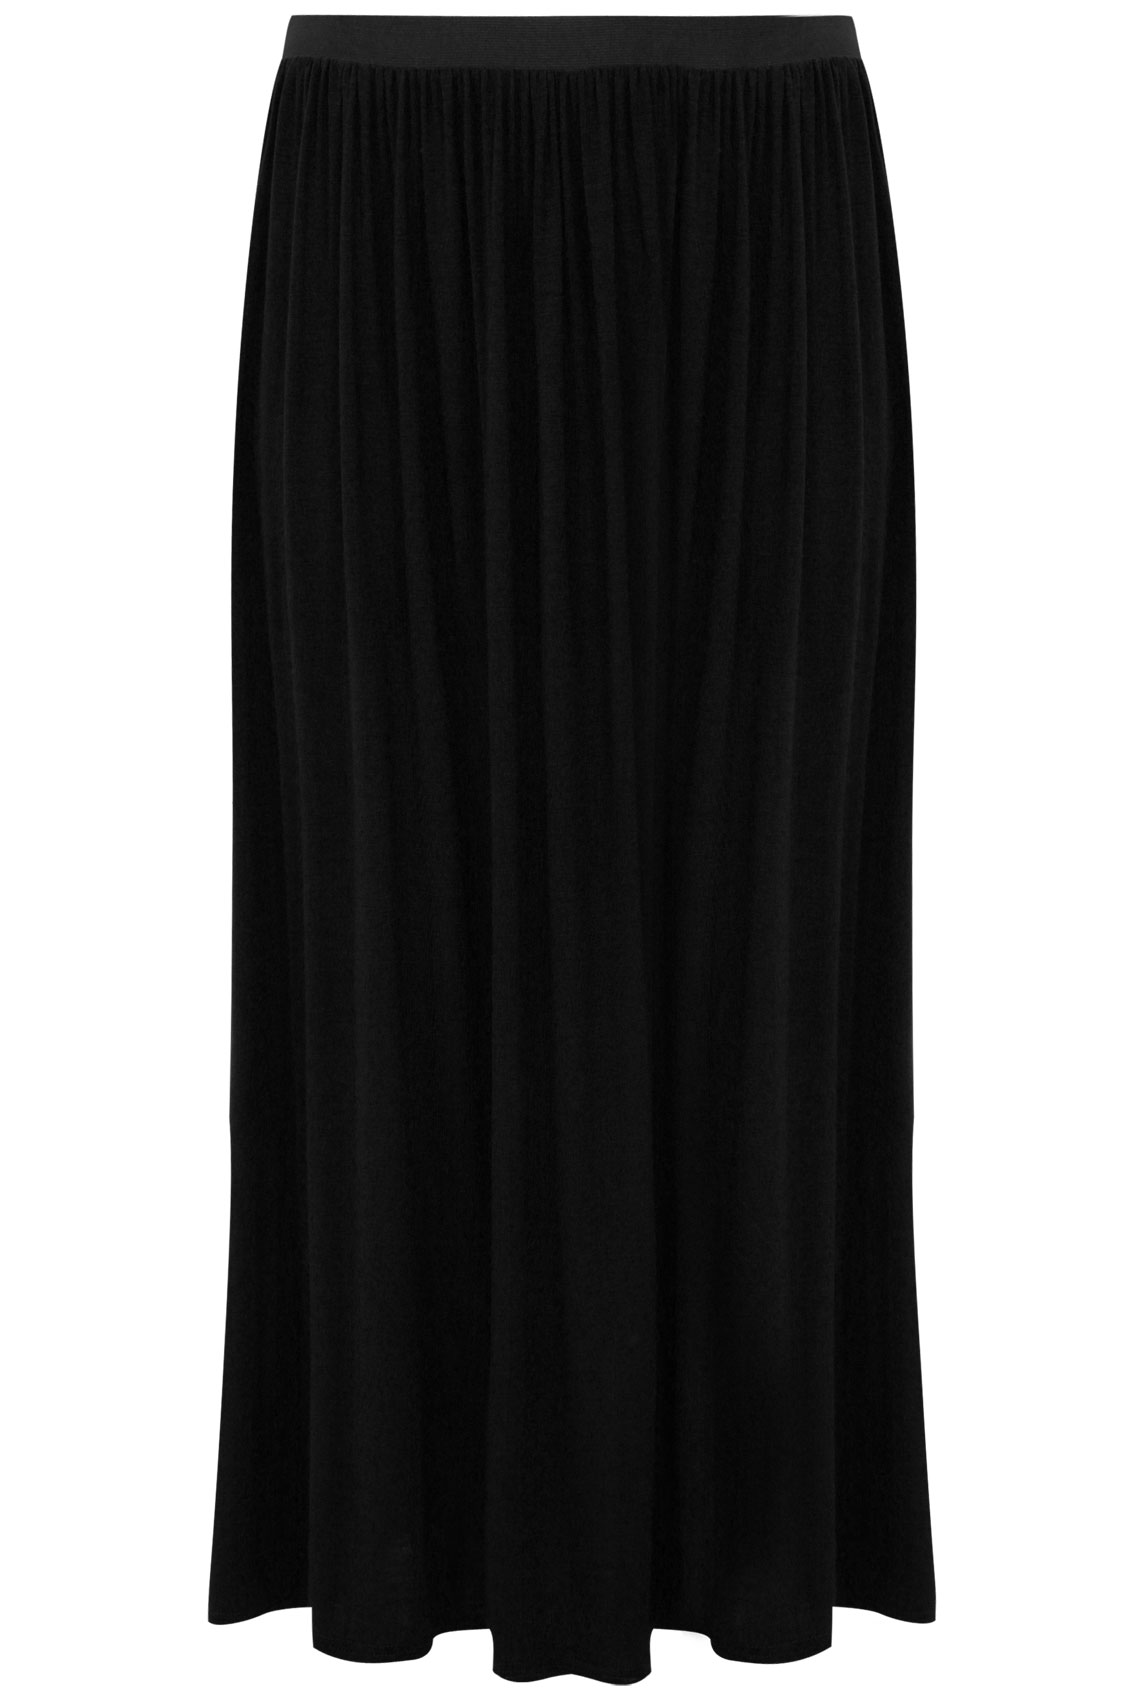 Black Maxi Skirt With Elasticated Waist plus Size 14 to 32